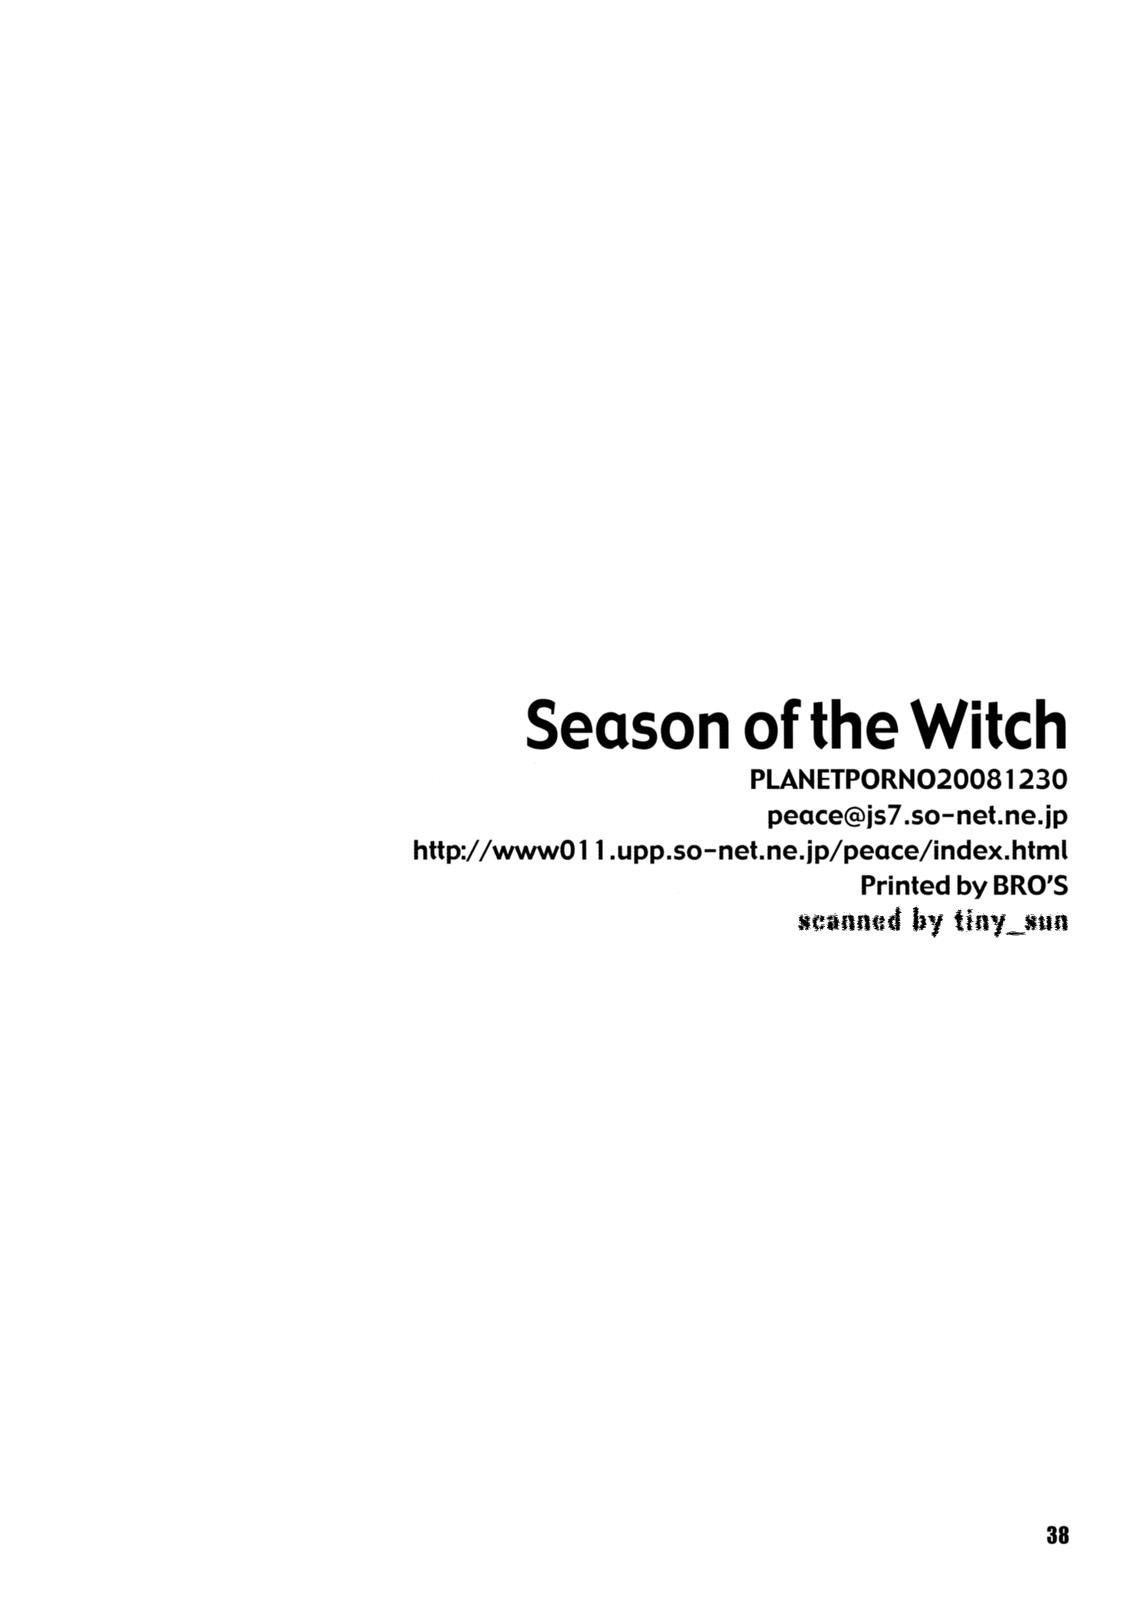 SEASON OF THE WITCH 36